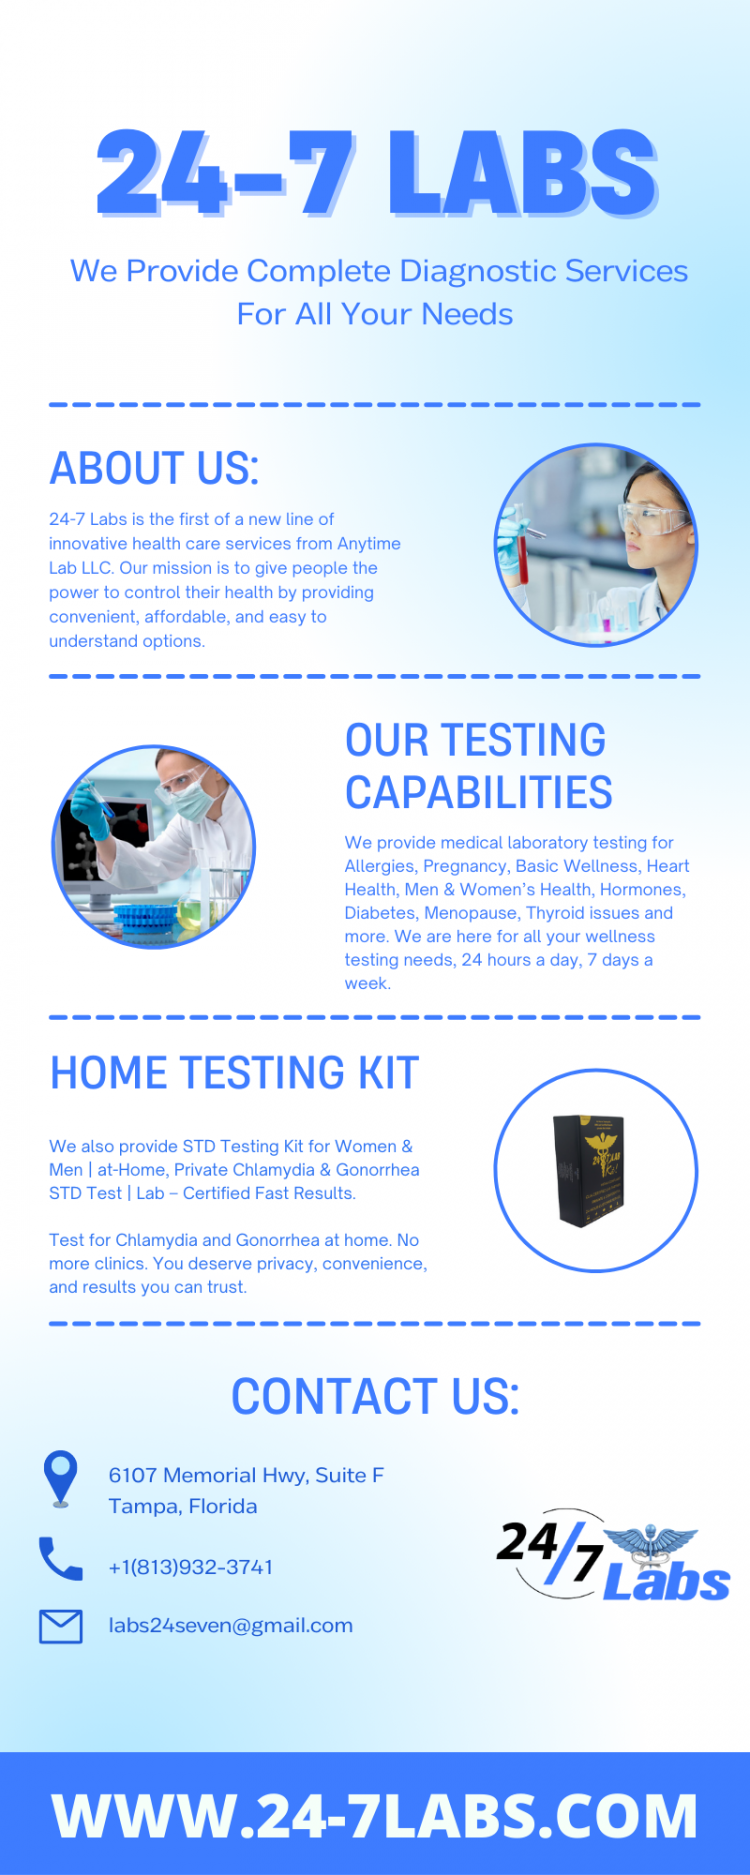 Your health is important, and so you deserve the best, most reliable testing services. 24-7 Labs provide over 90 tests for each age group, to help you keep yourself healthy for the long term. Our convenient, affordable options offer many advantages over a hospital or private practice, making it easier than ever to care for you. https://www.24-7labs.com/